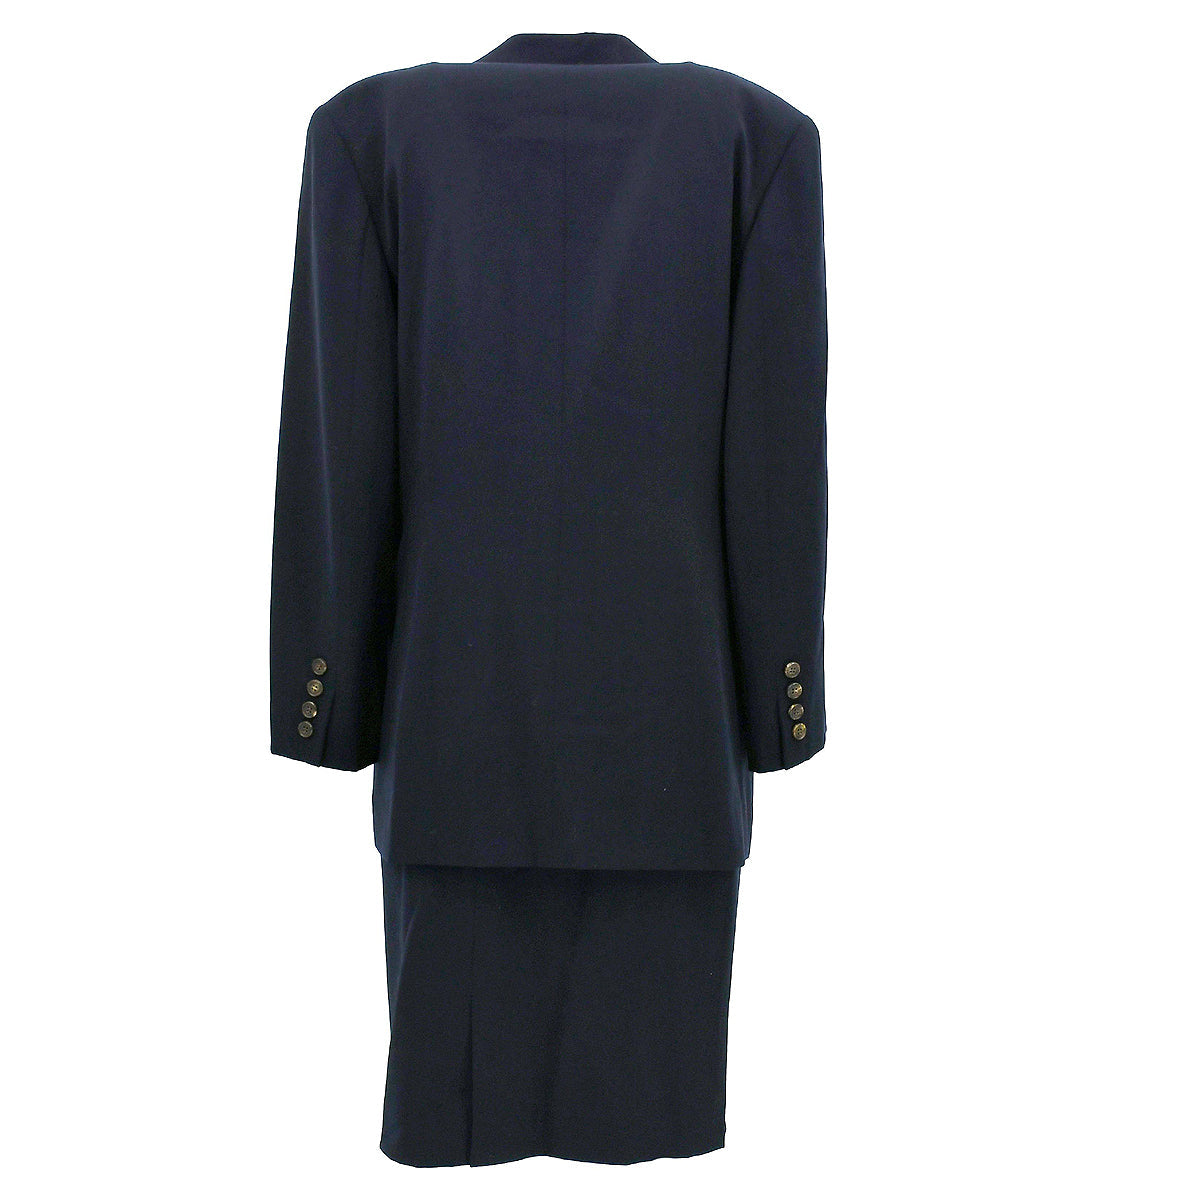 Burberrys double-breasted wool skirt suit 